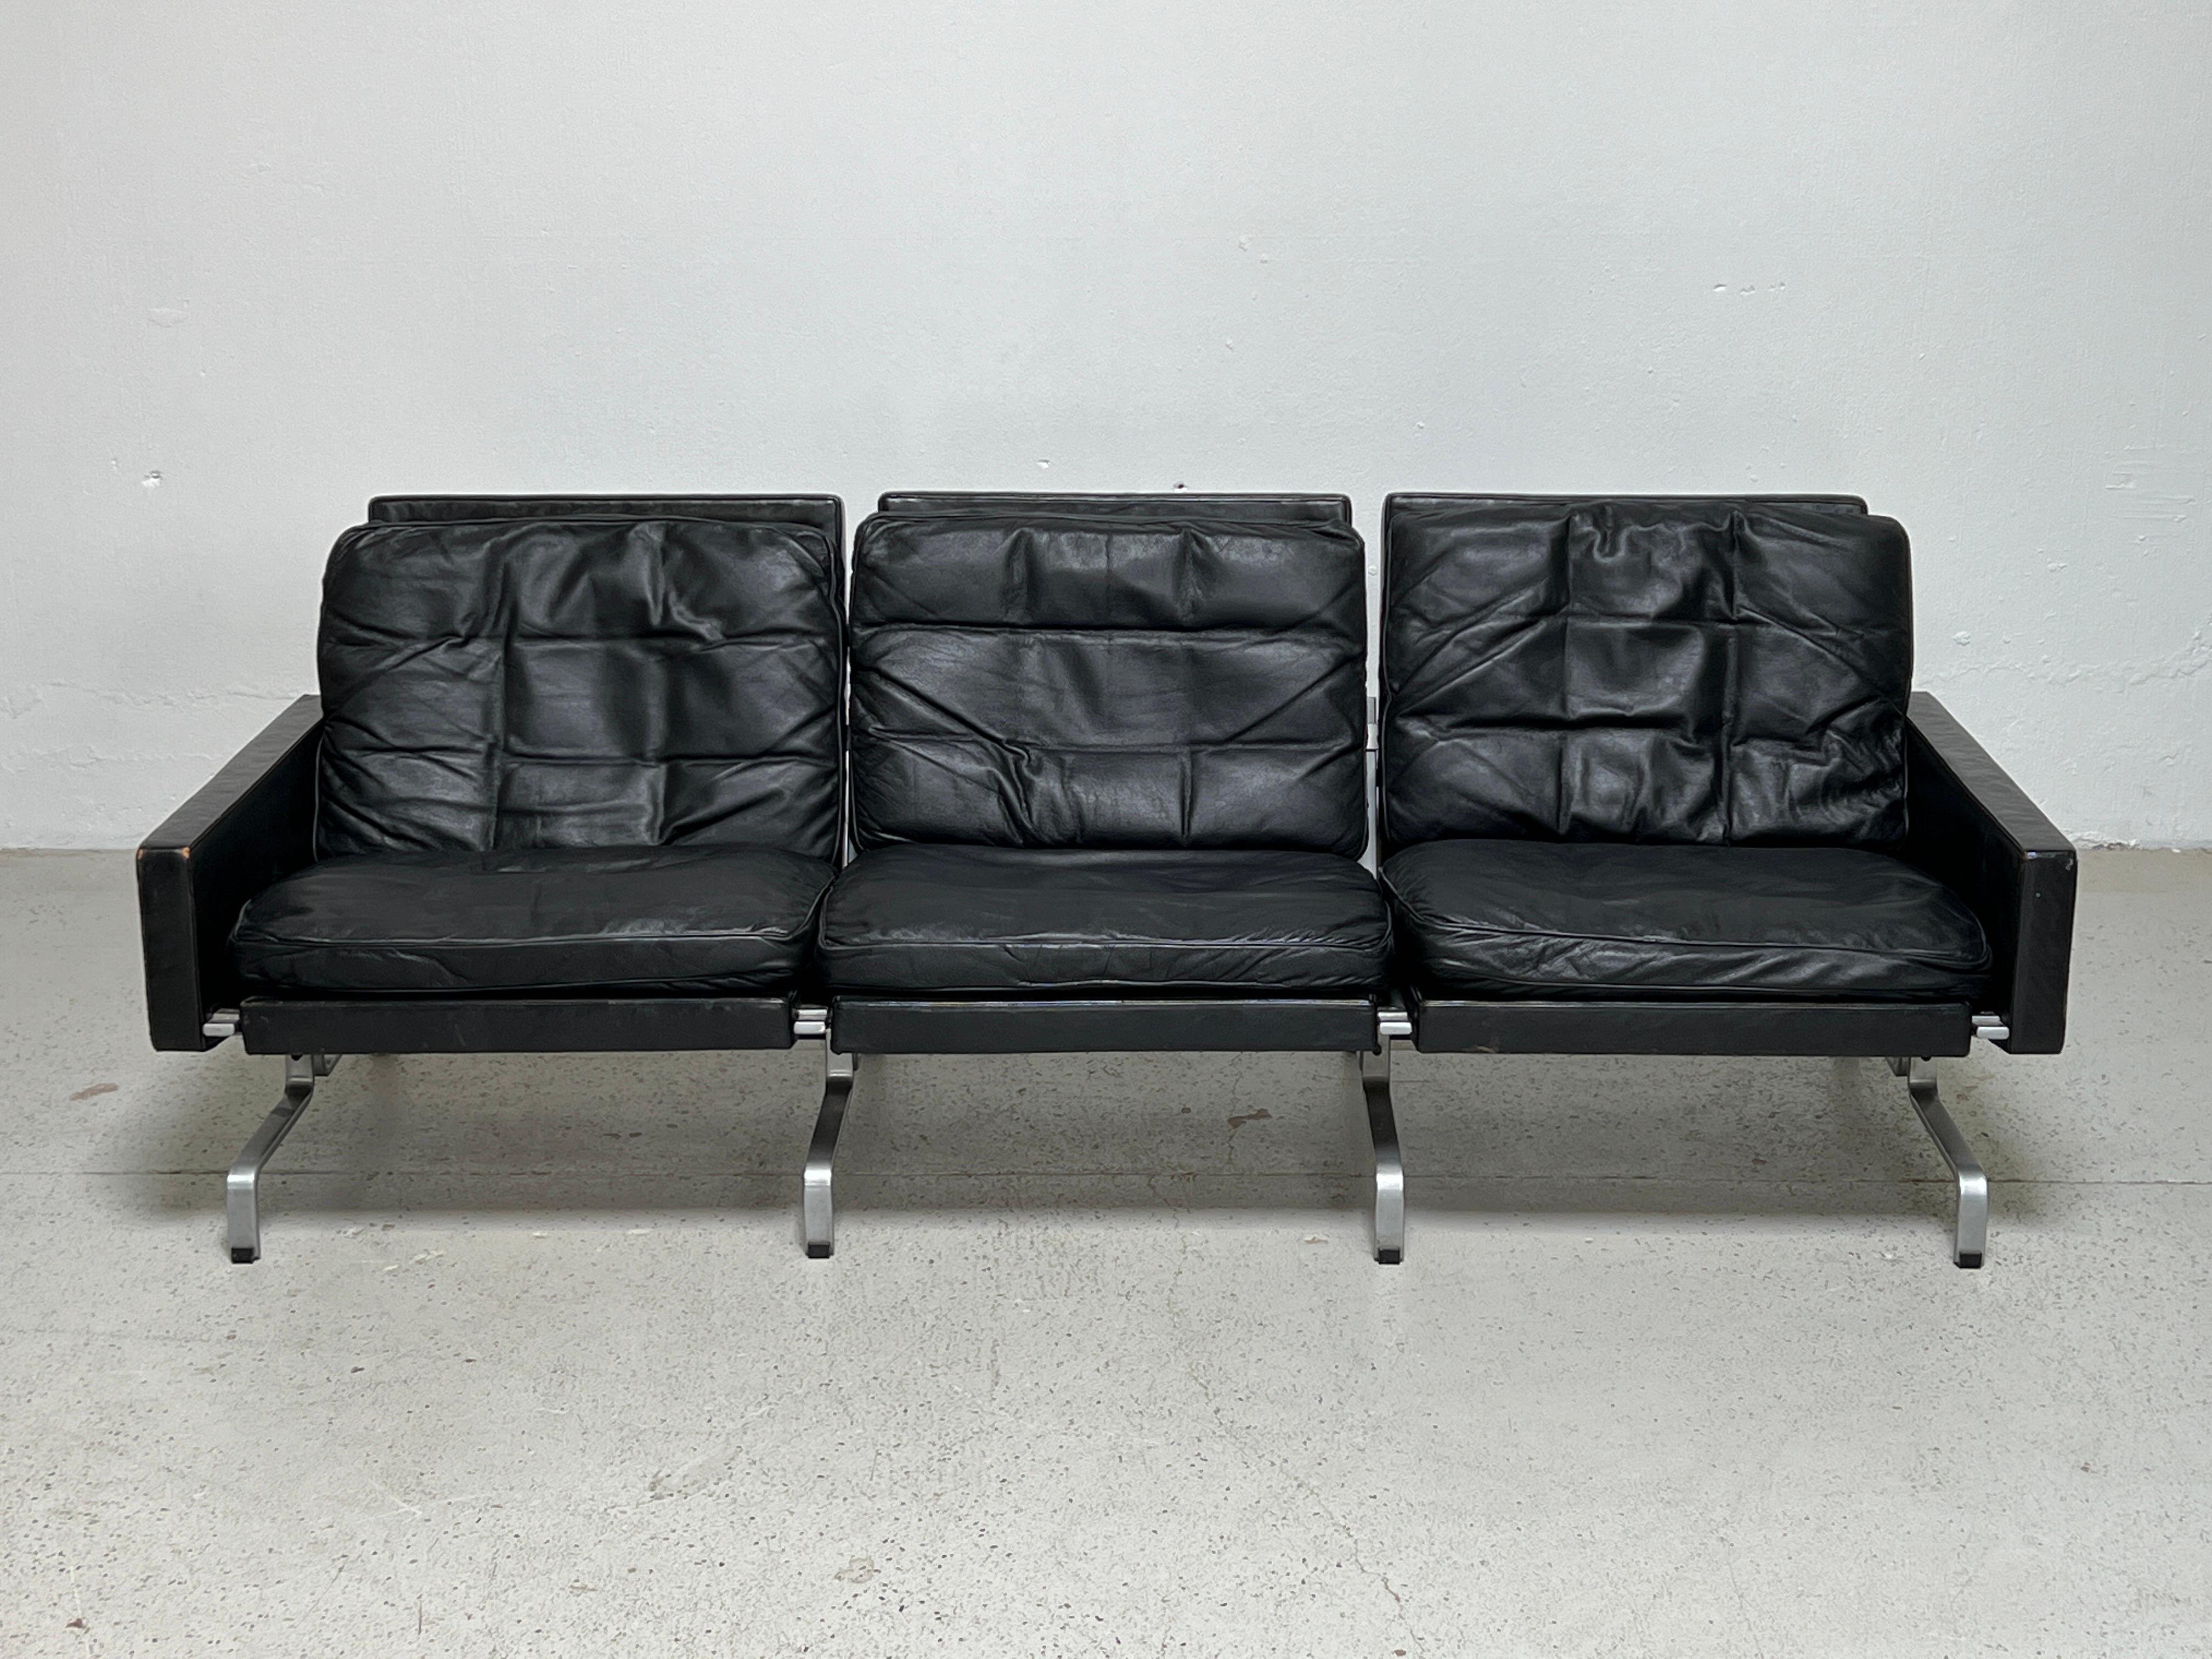 PK-31/3 Sofa by Poul Kjærholm for E. Kold Christensen In Good Condition For Sale In Dallas, TX